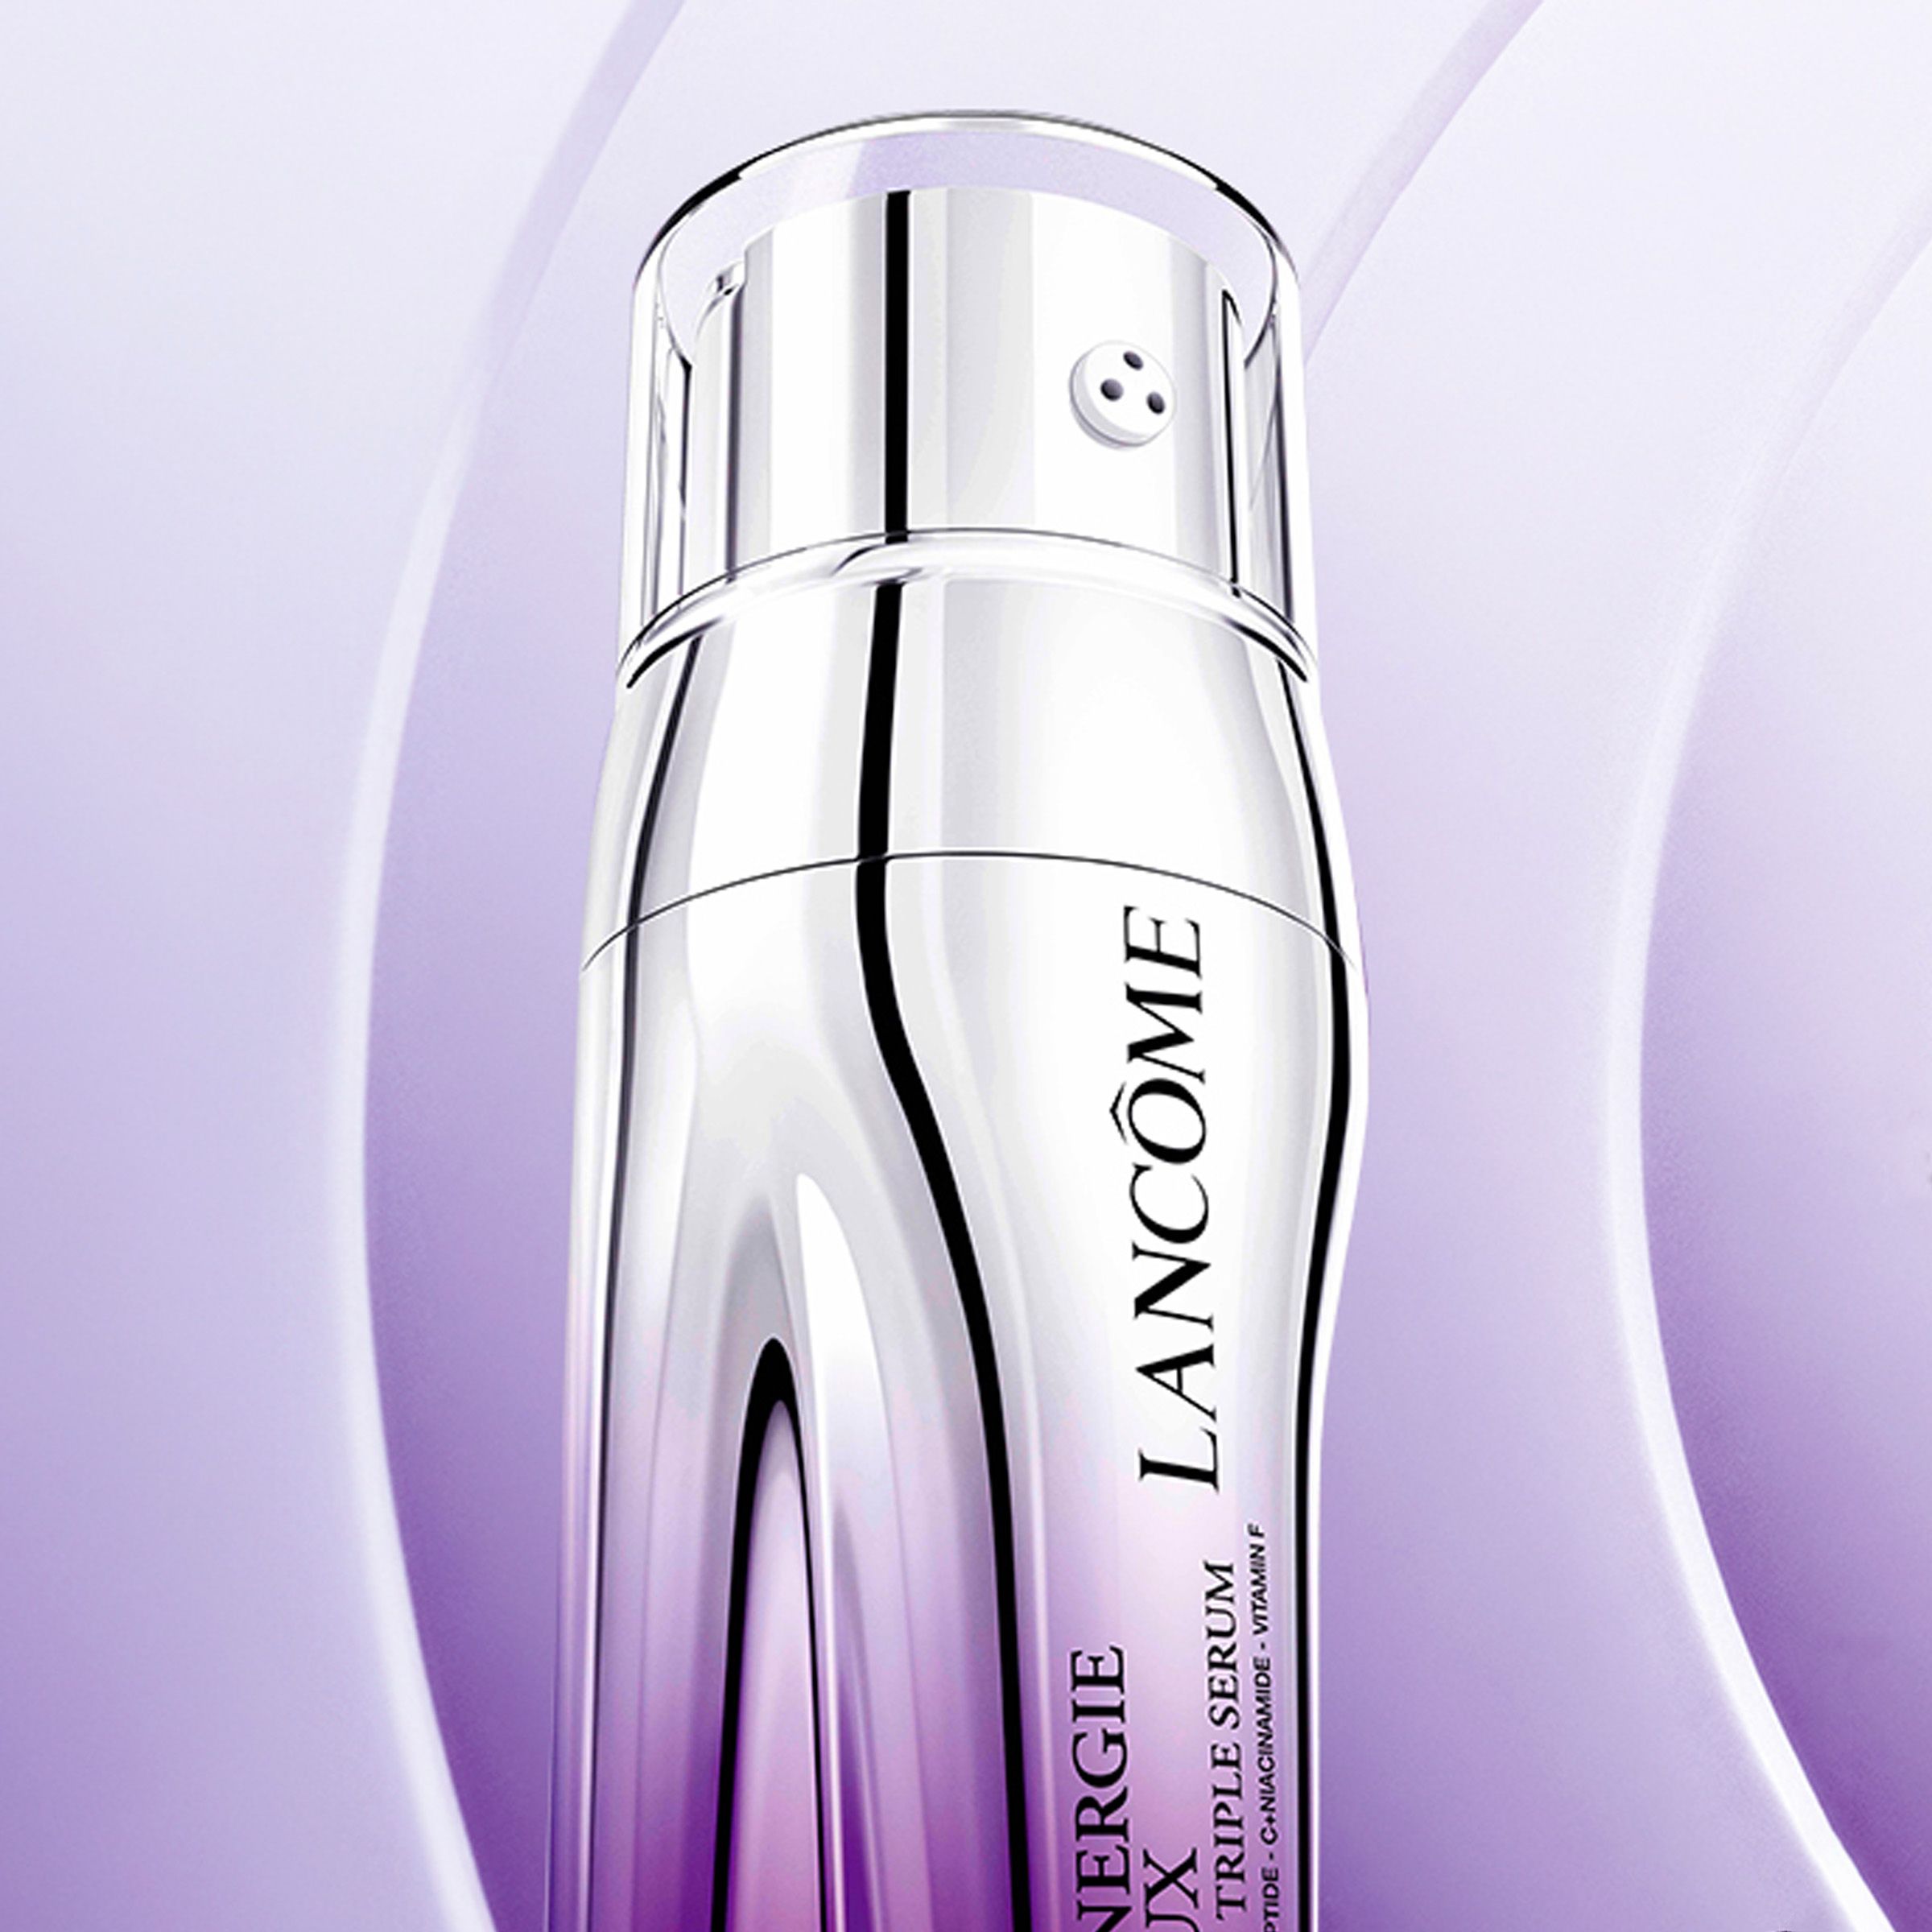 The high-performance anti-ageing efficacy of Rénergie H.C.F. Triple Serum now calibrated for eyes.